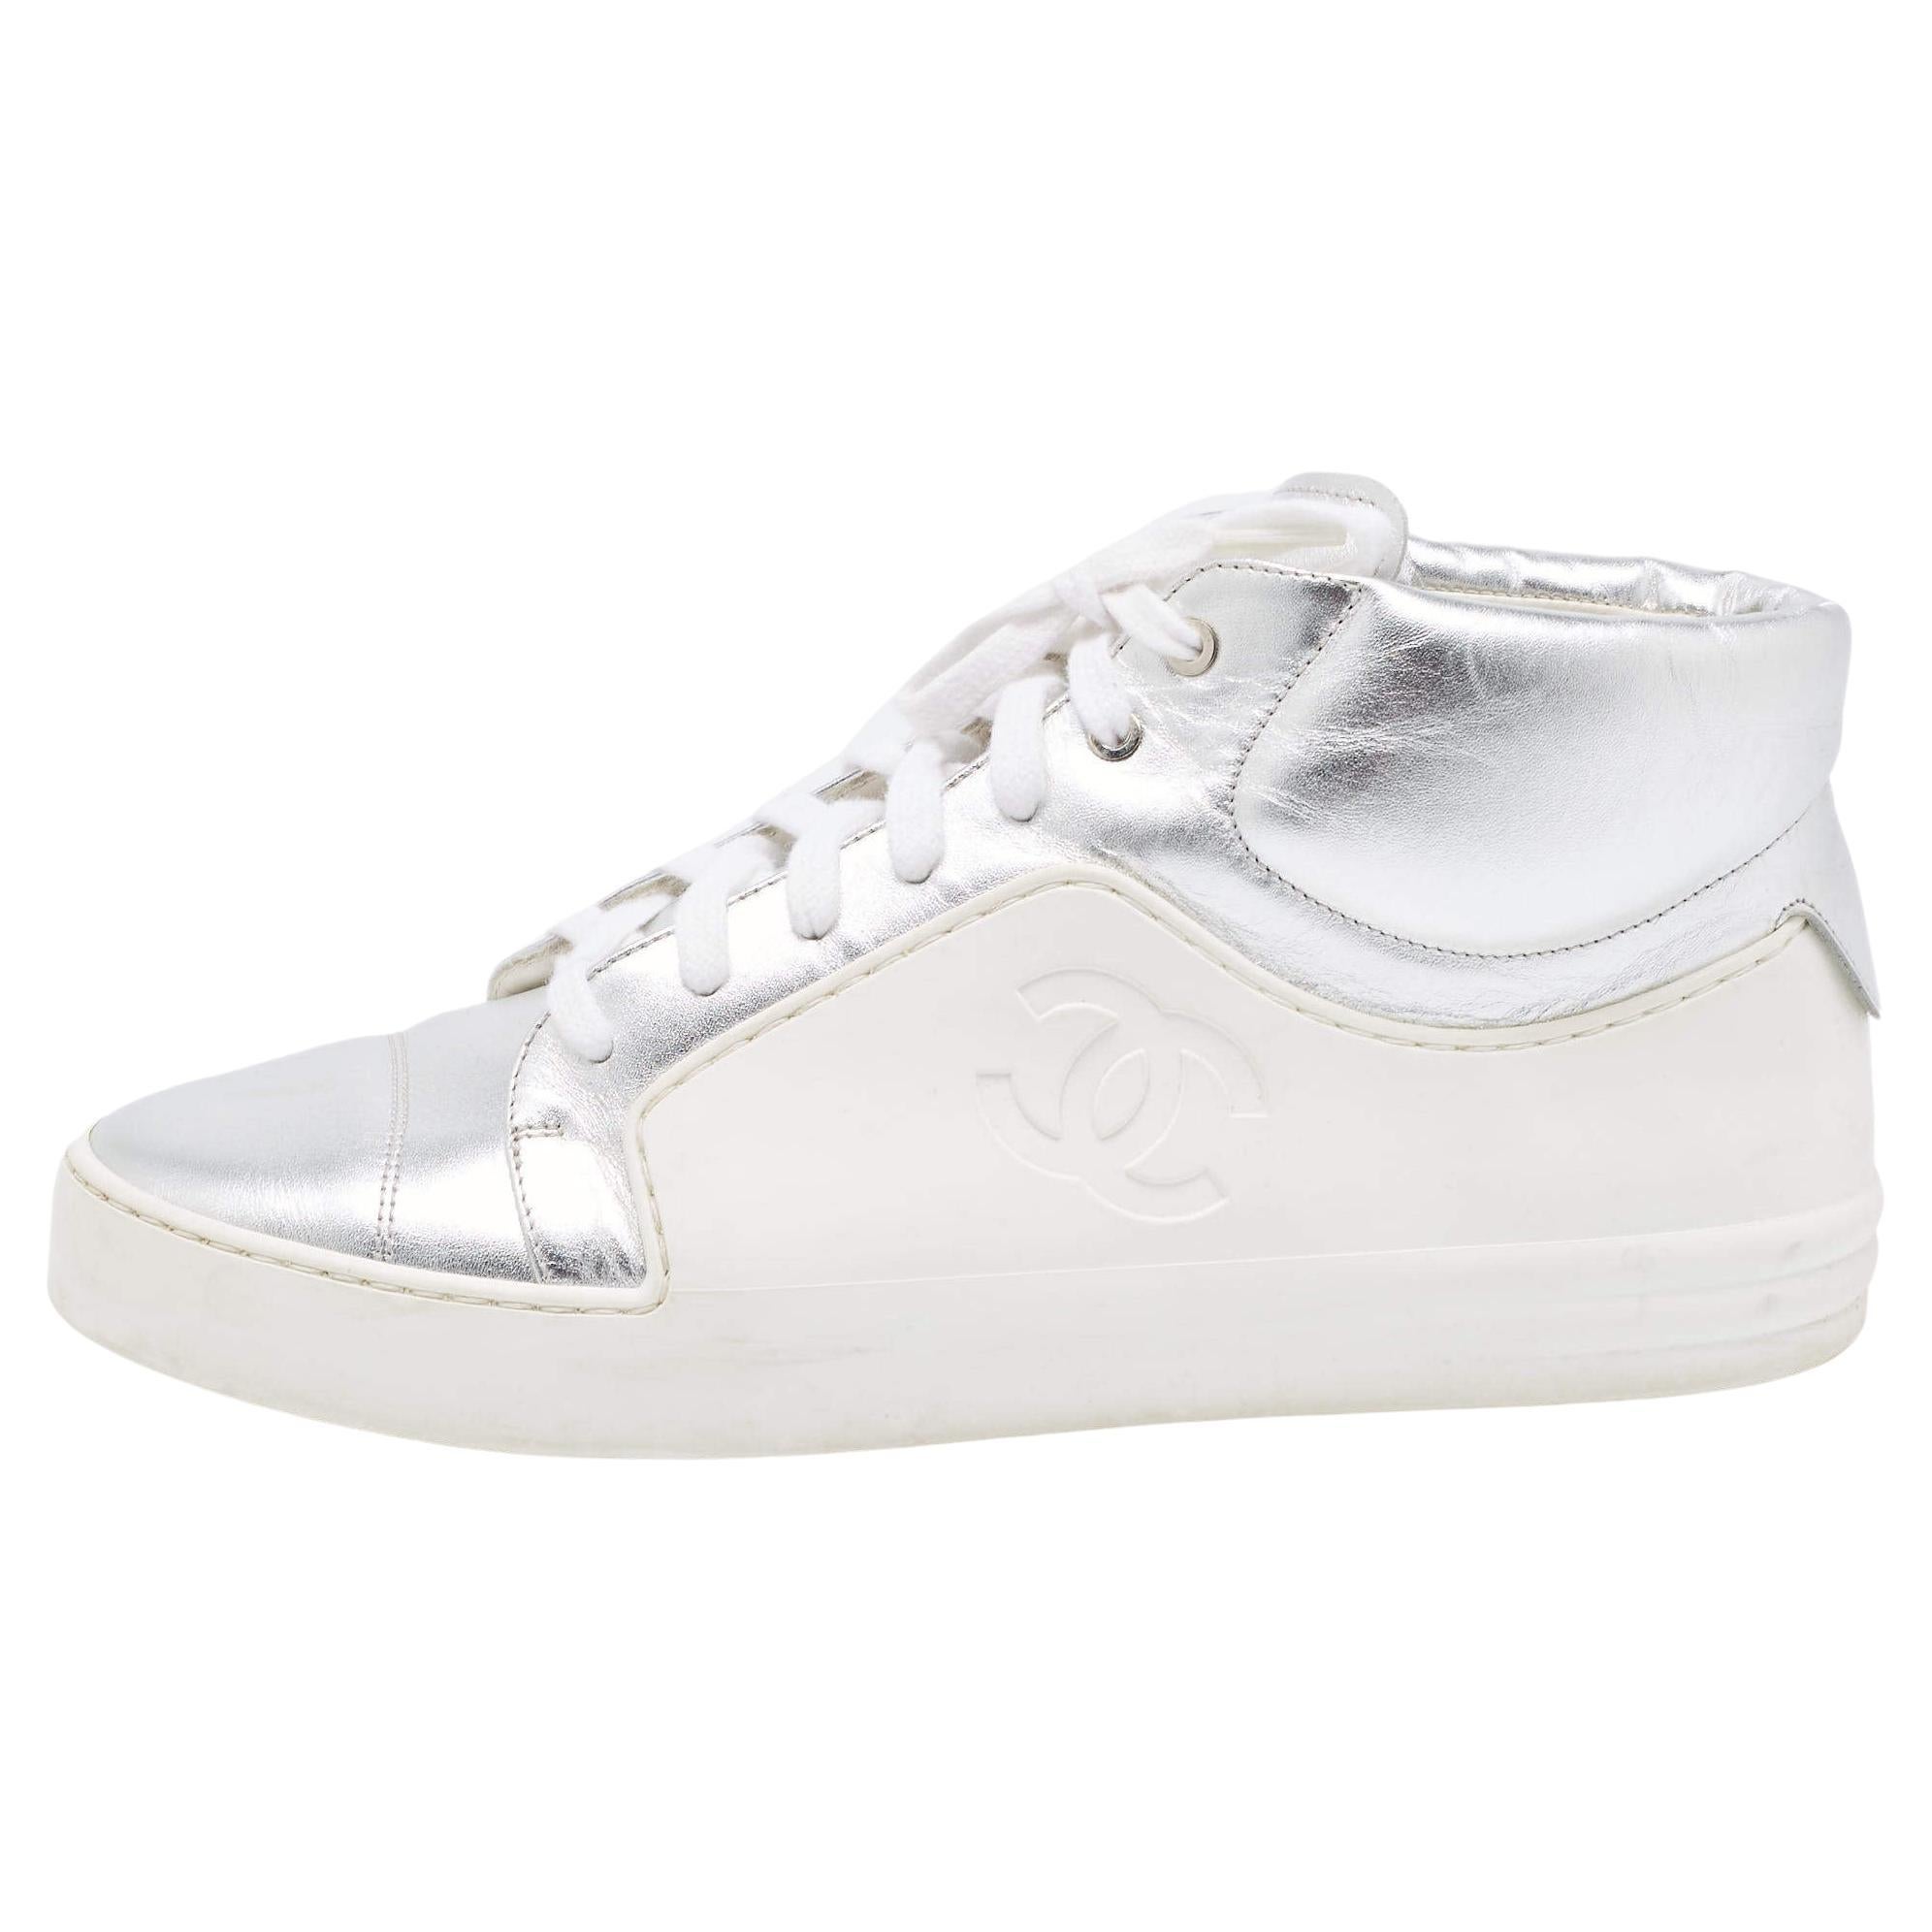 Chanel Metallic Silver/White Leather And Rubber Lace Up High Top Sneakers Size 3